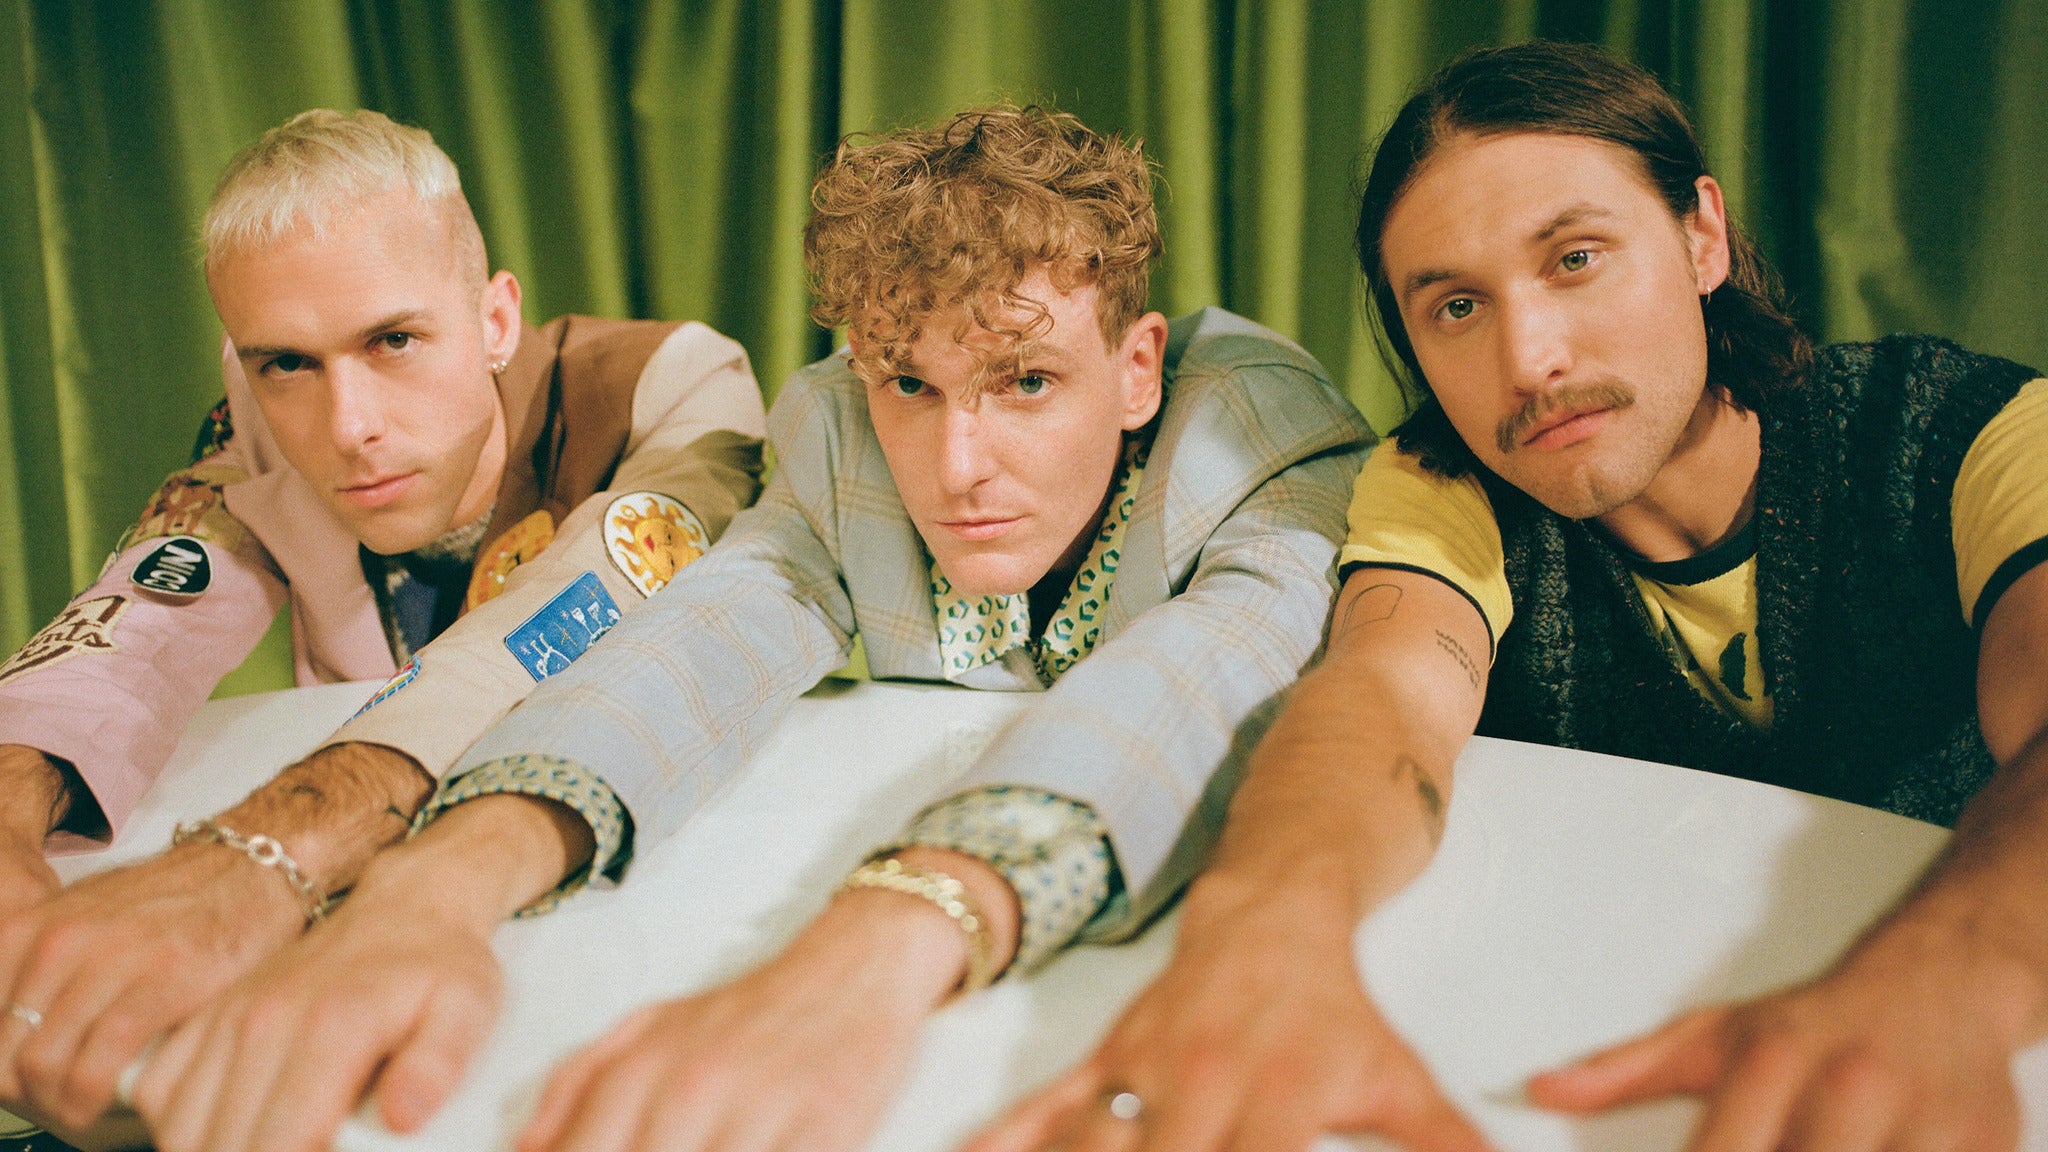 COIN: Rainbow Dreamland Tour in Baltimore event information